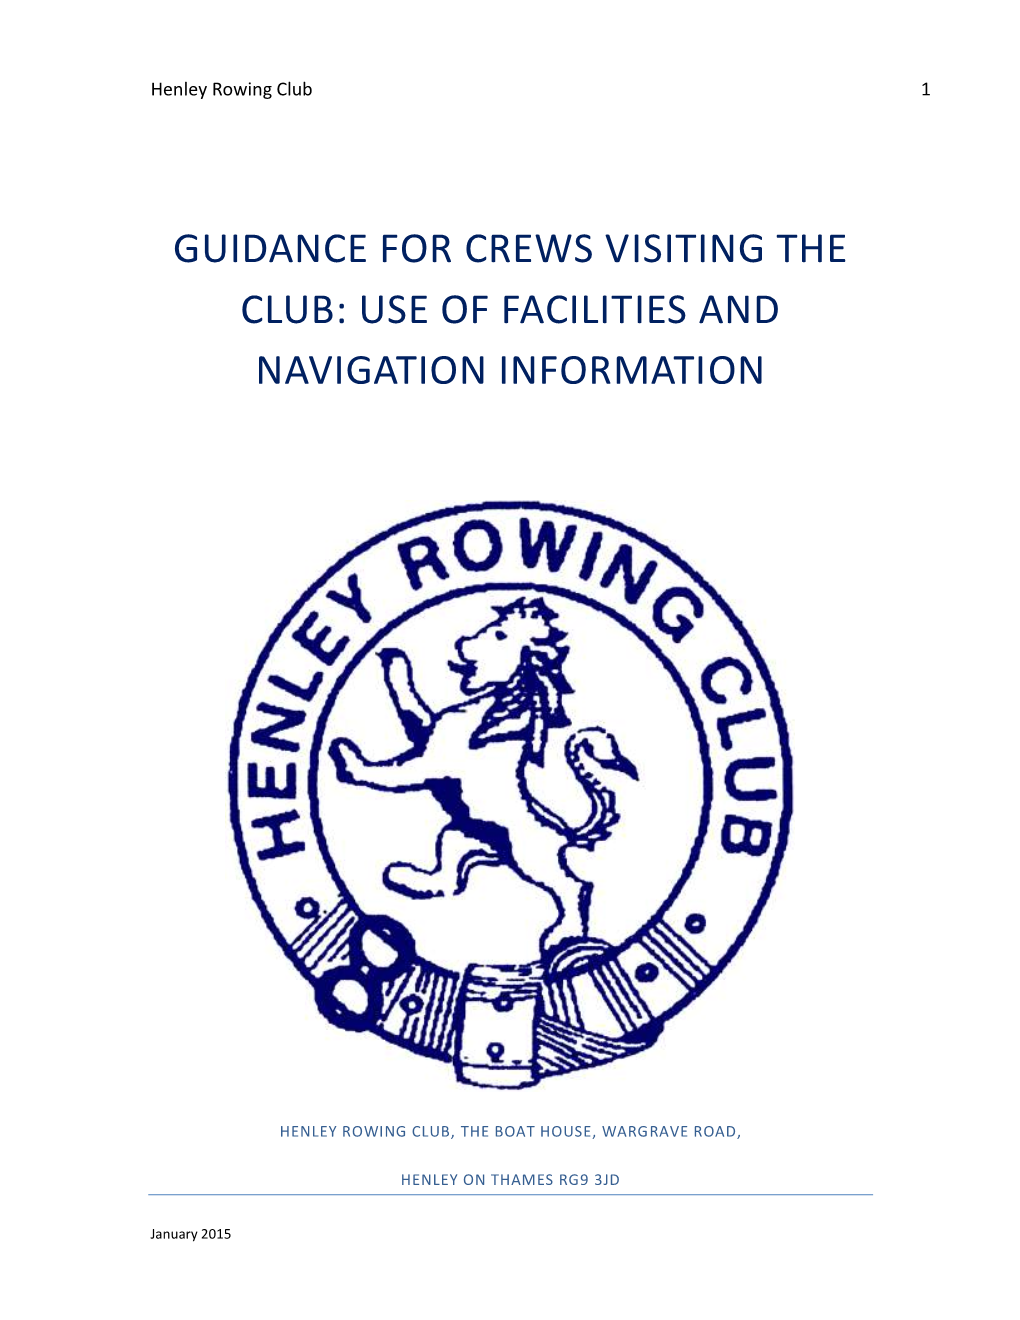 Guidance for Crews Visiting the Club: Use of Facilities and Navigation Information